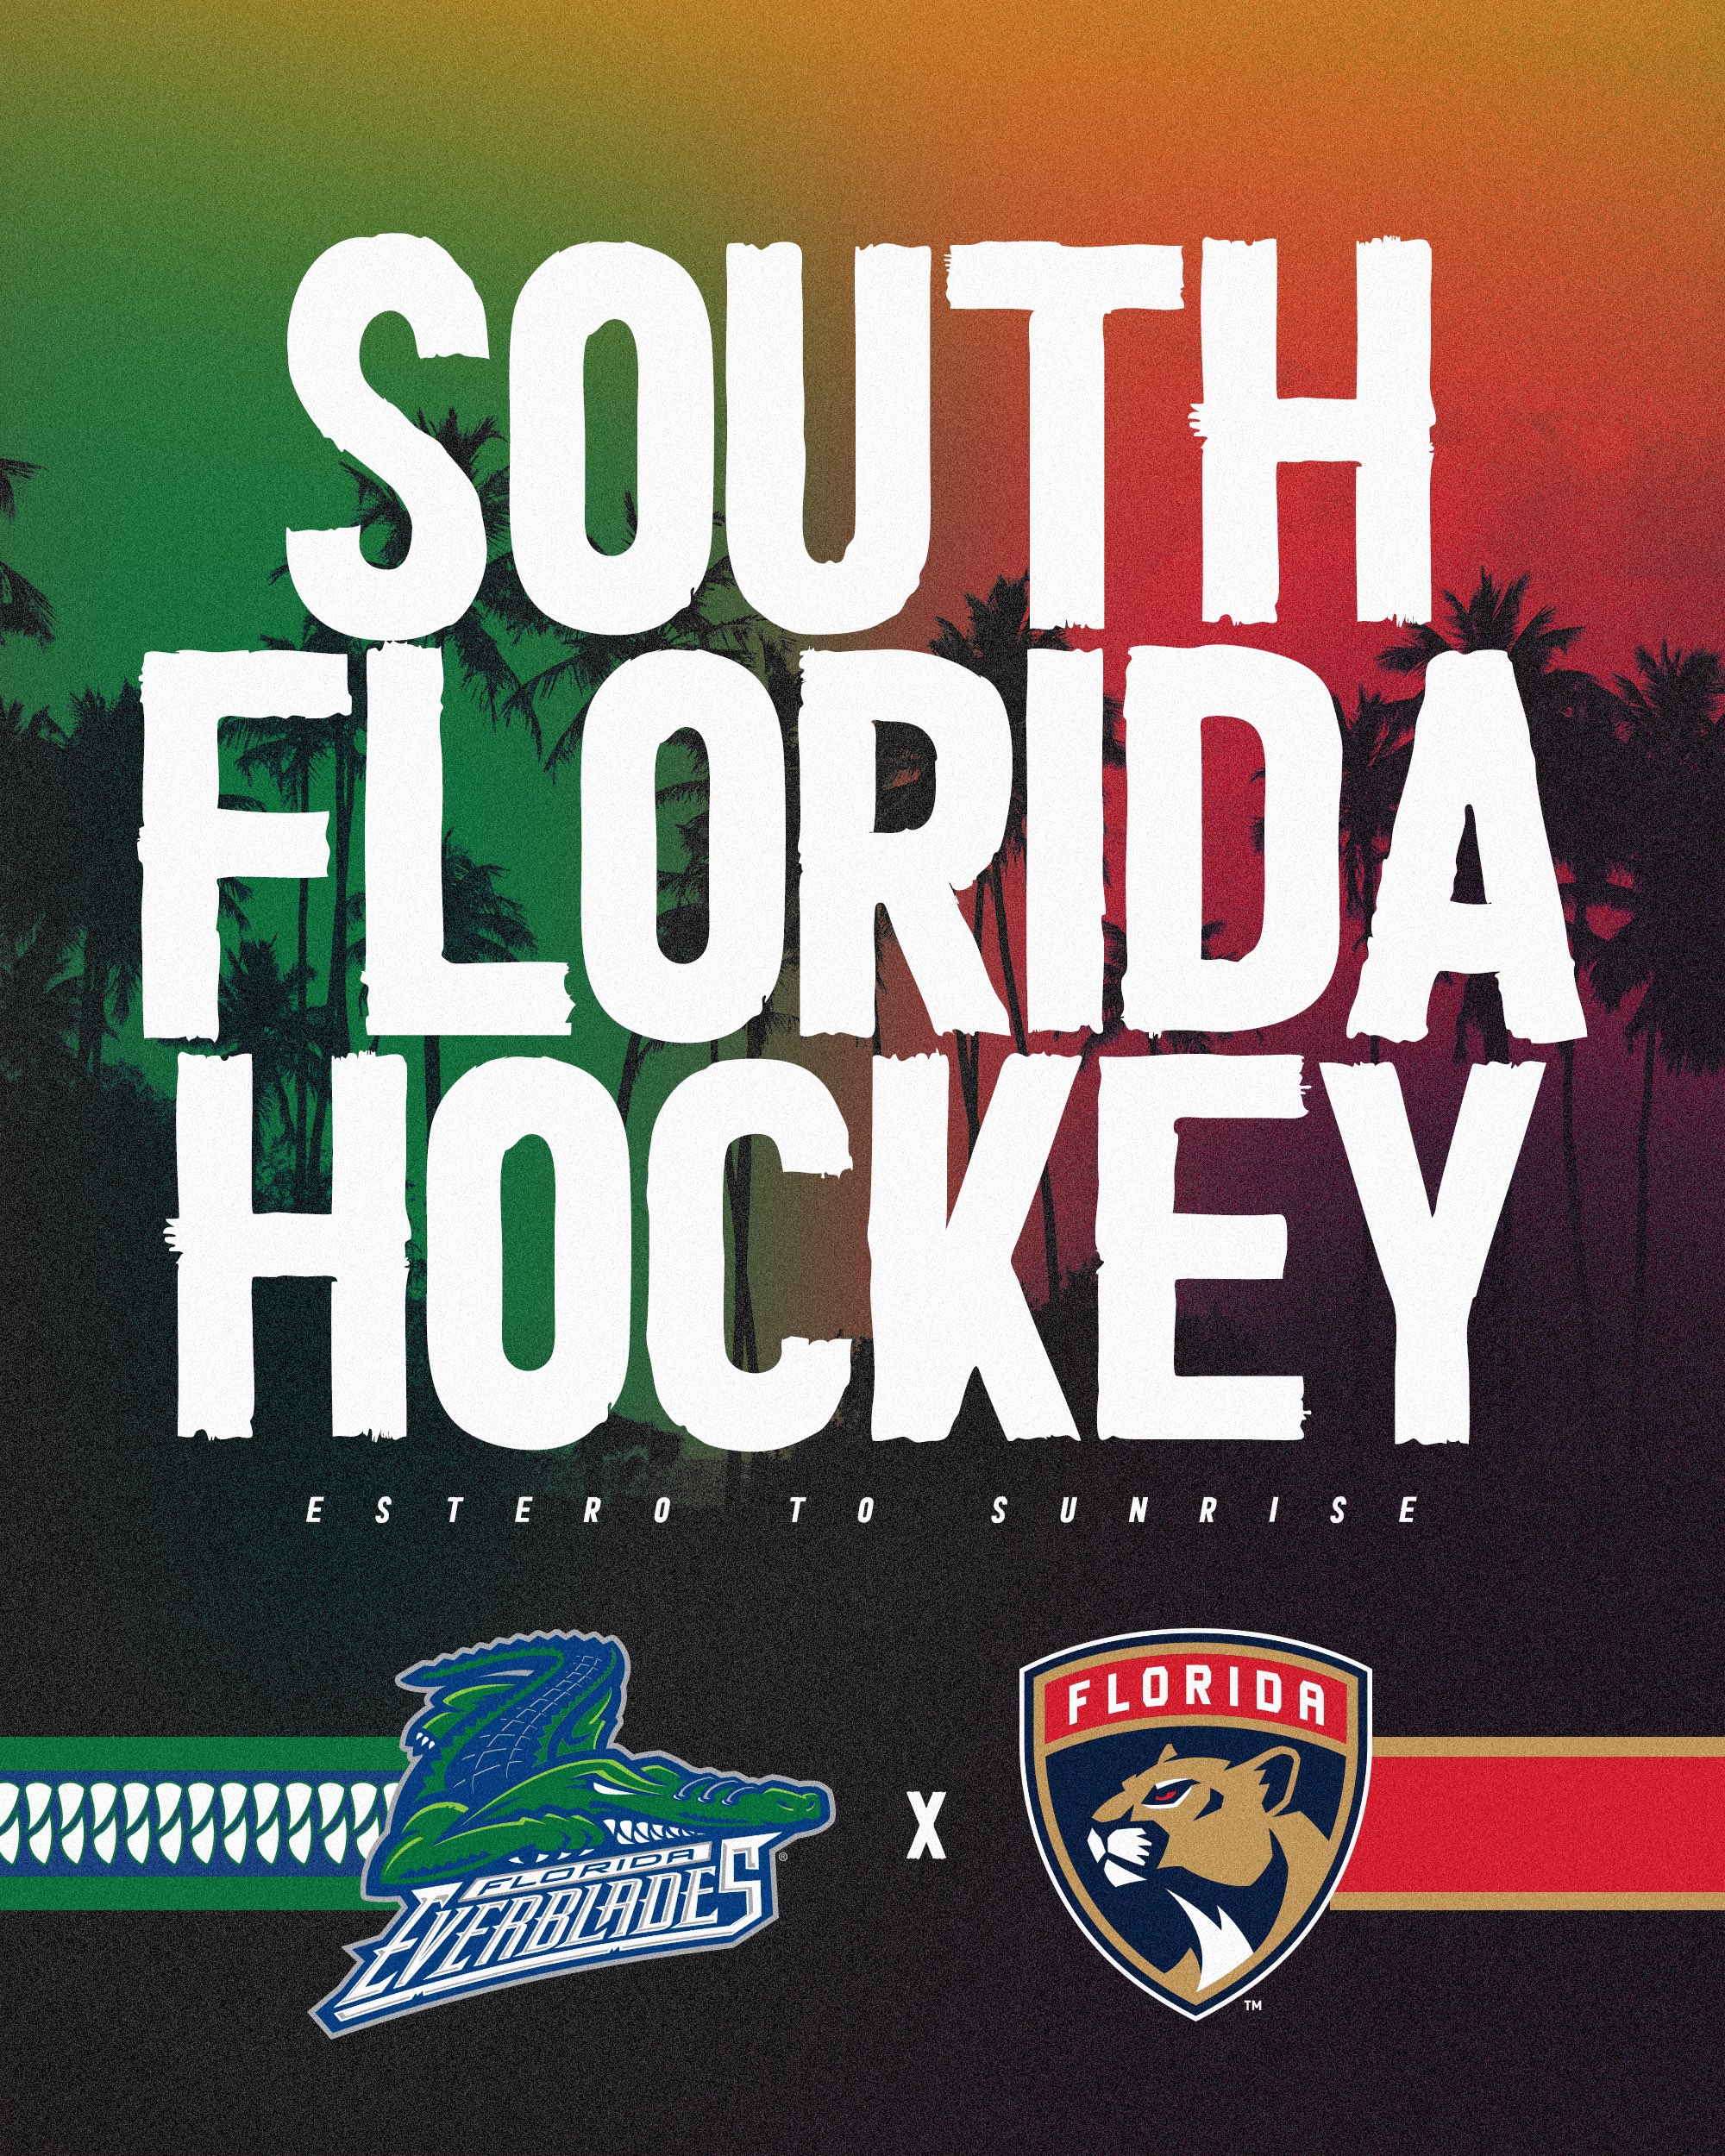 Florida Panthers on Twitter to the family, fl_everblades! We